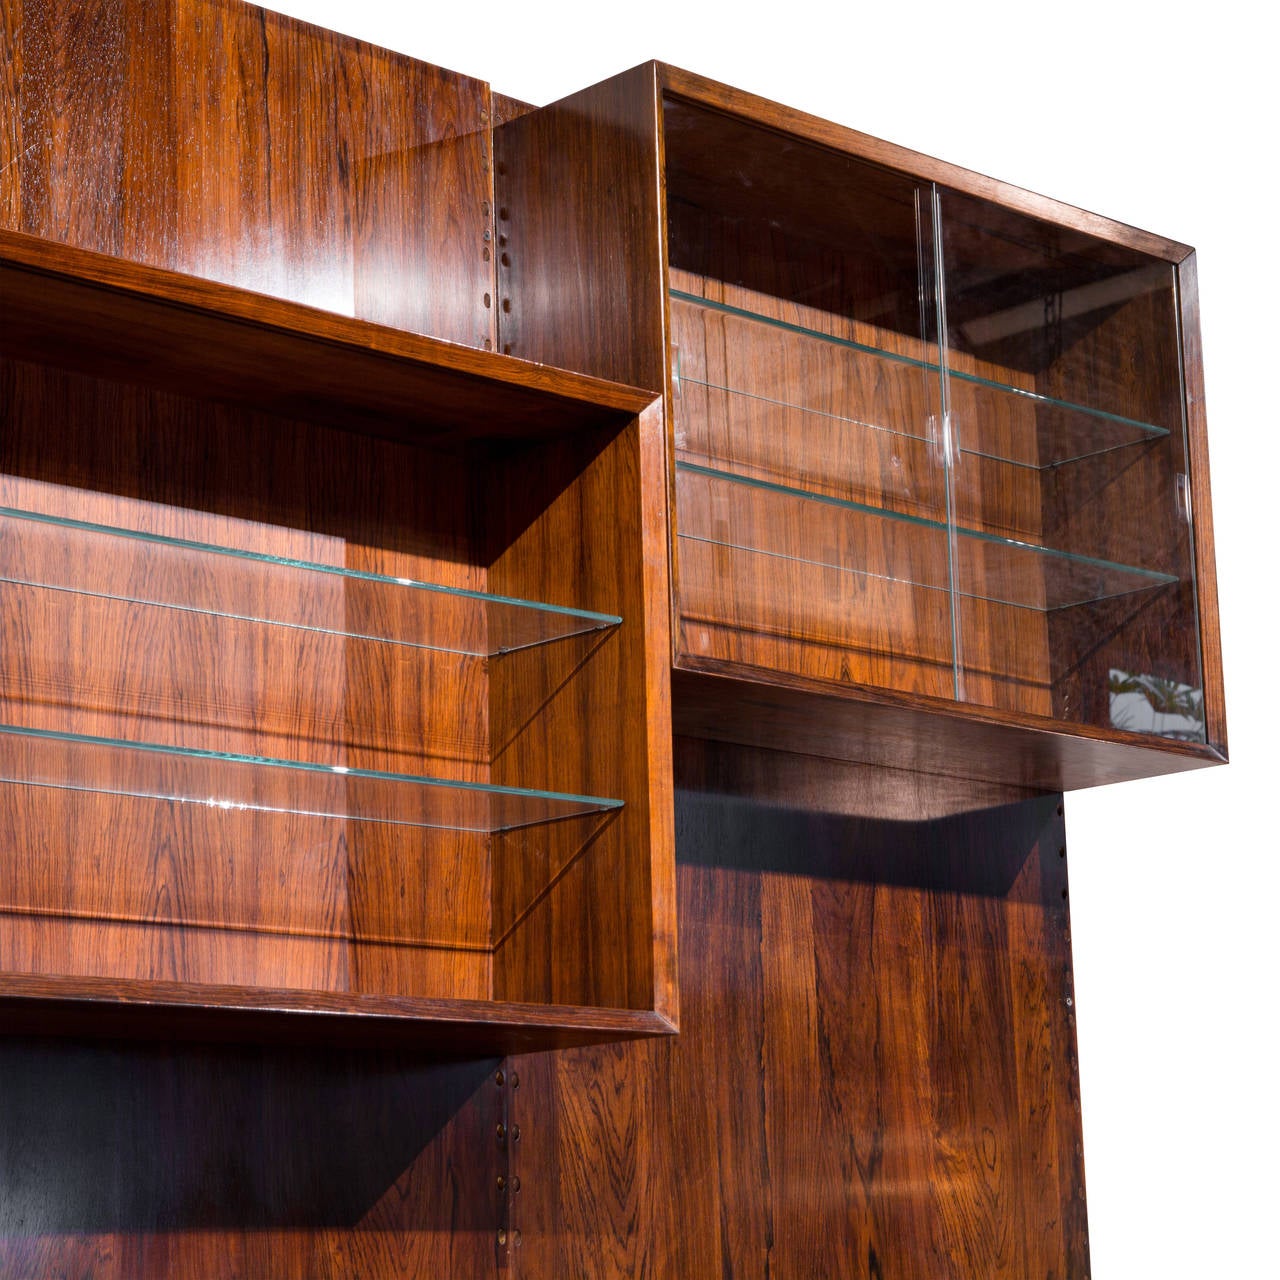 Stunning modular rosewood wall unit / bookcase by Poul Cadovius. Recently re-finished to bring out color and grain in wood. Four modular cubes with two glass shelves each. Wall mounted.